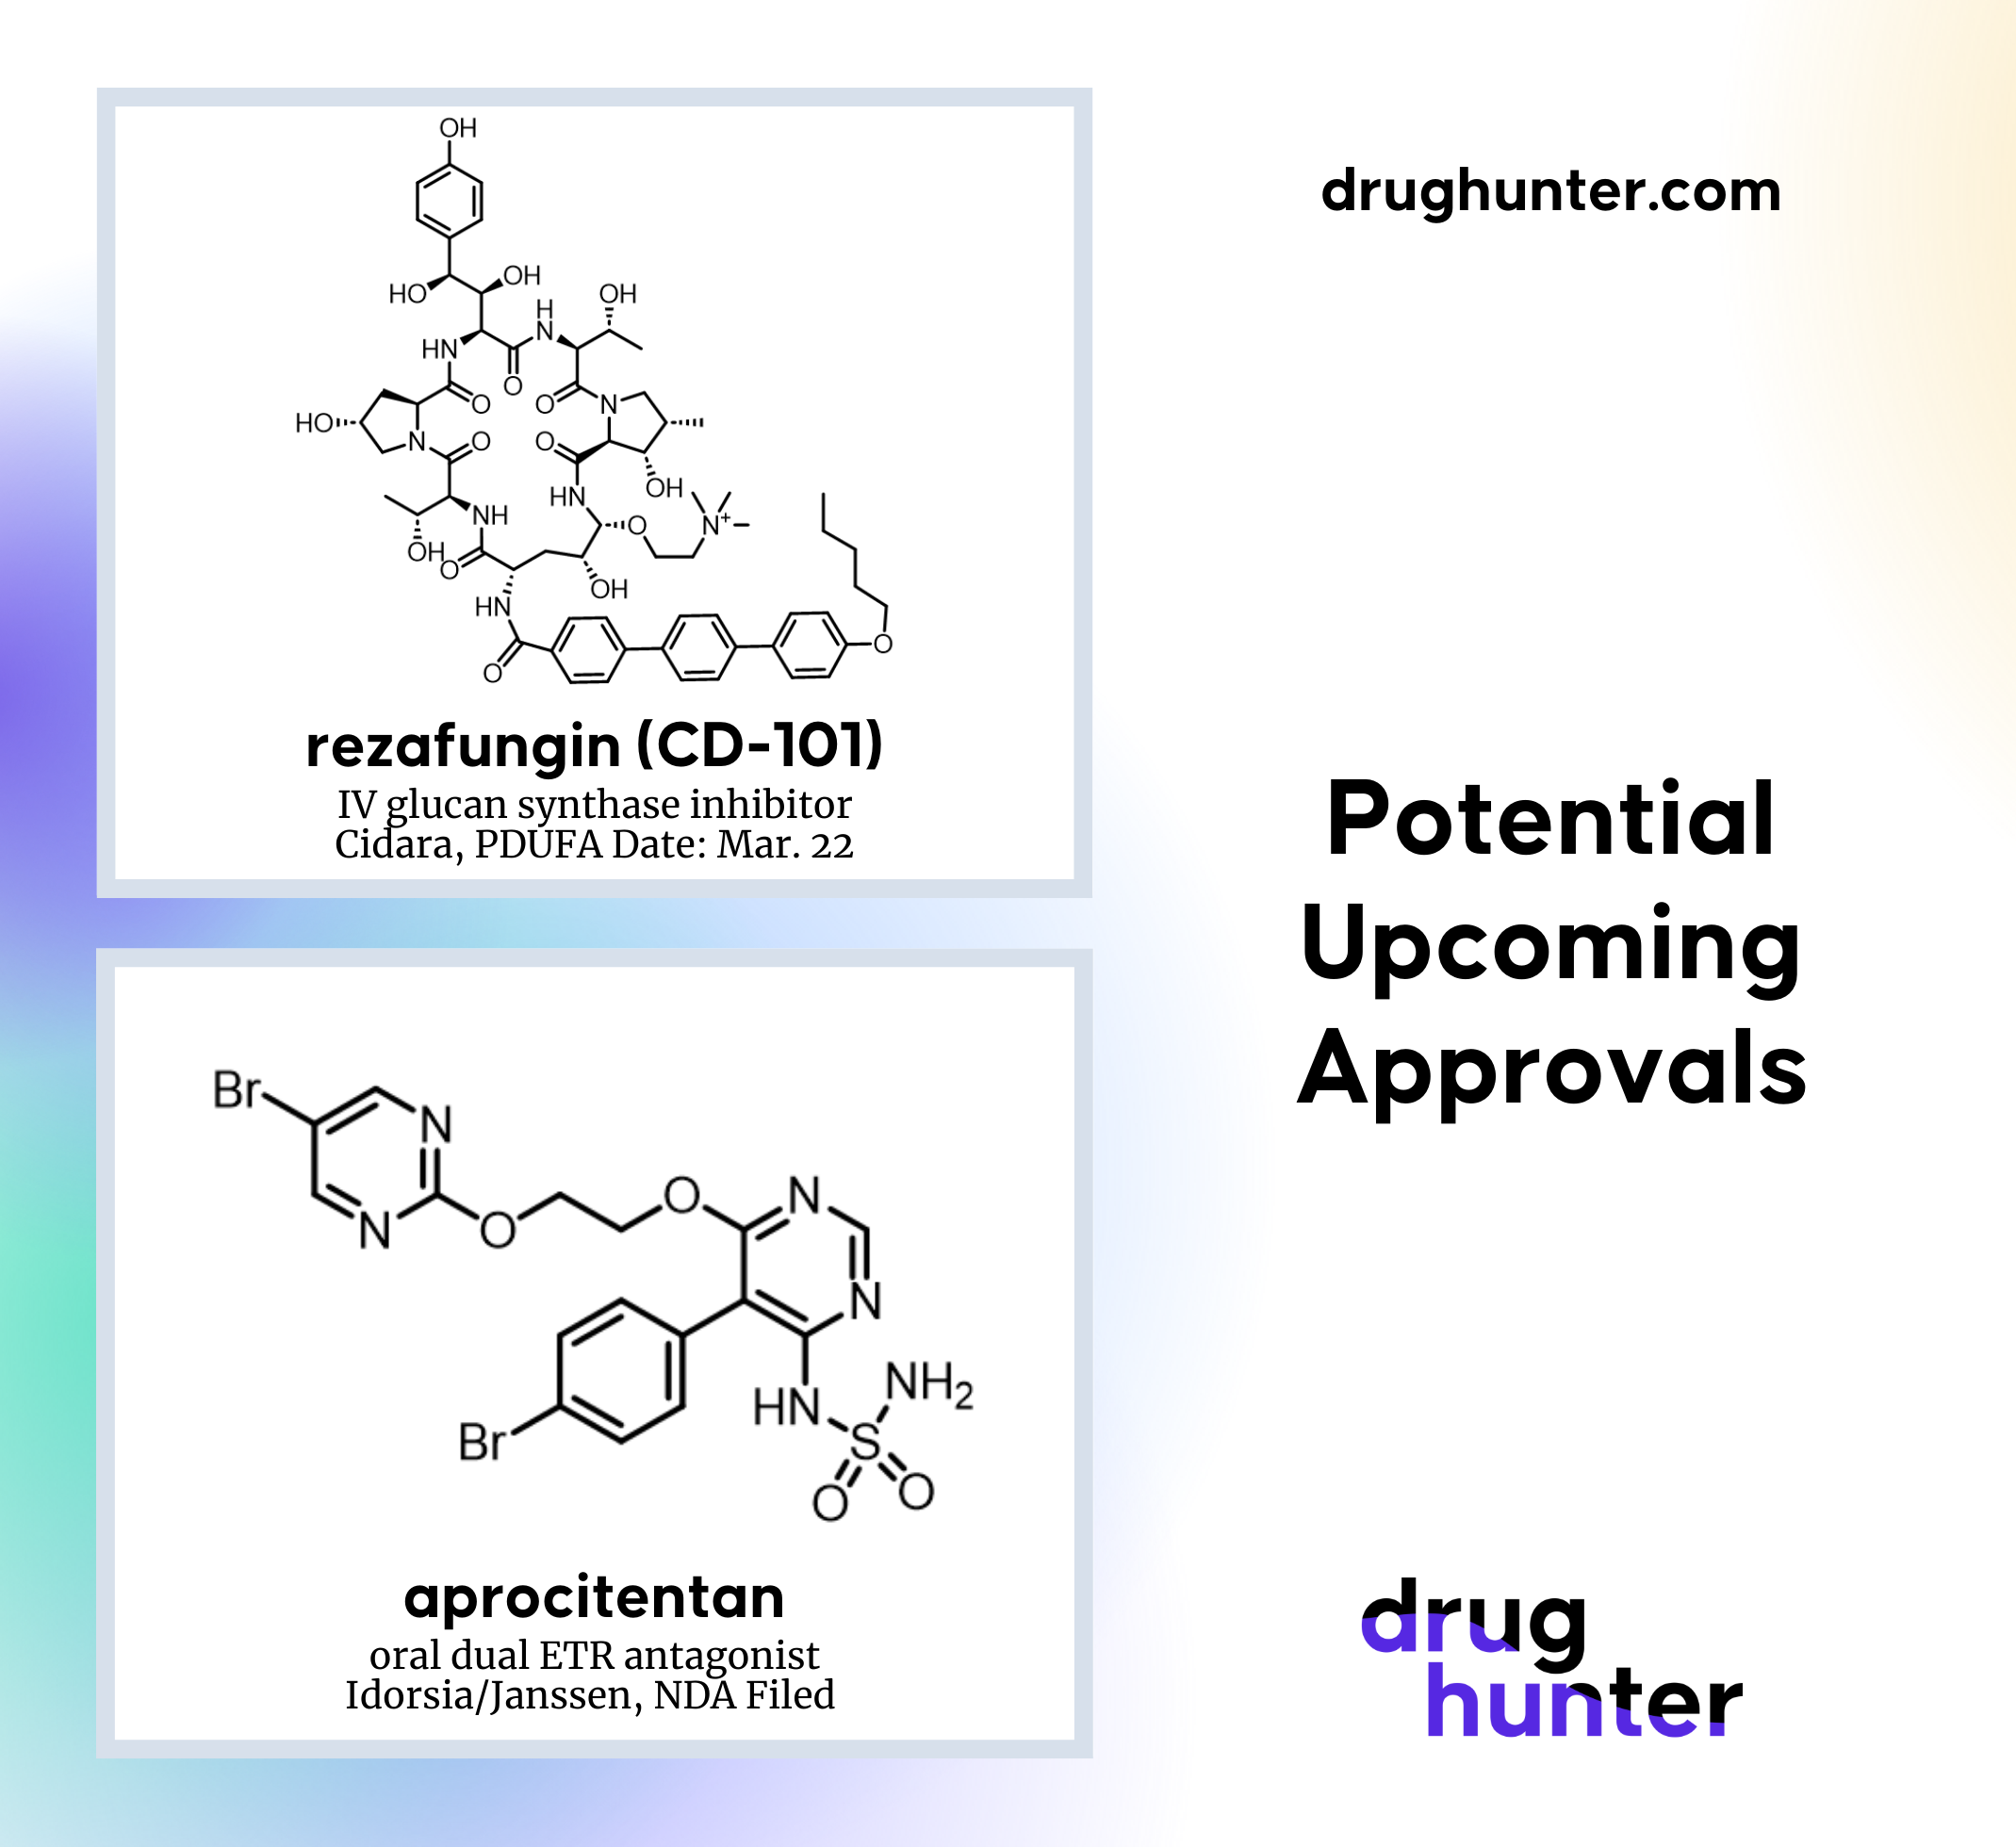 Potential Upcoming Approvals: rezafungin and aprocitentan||